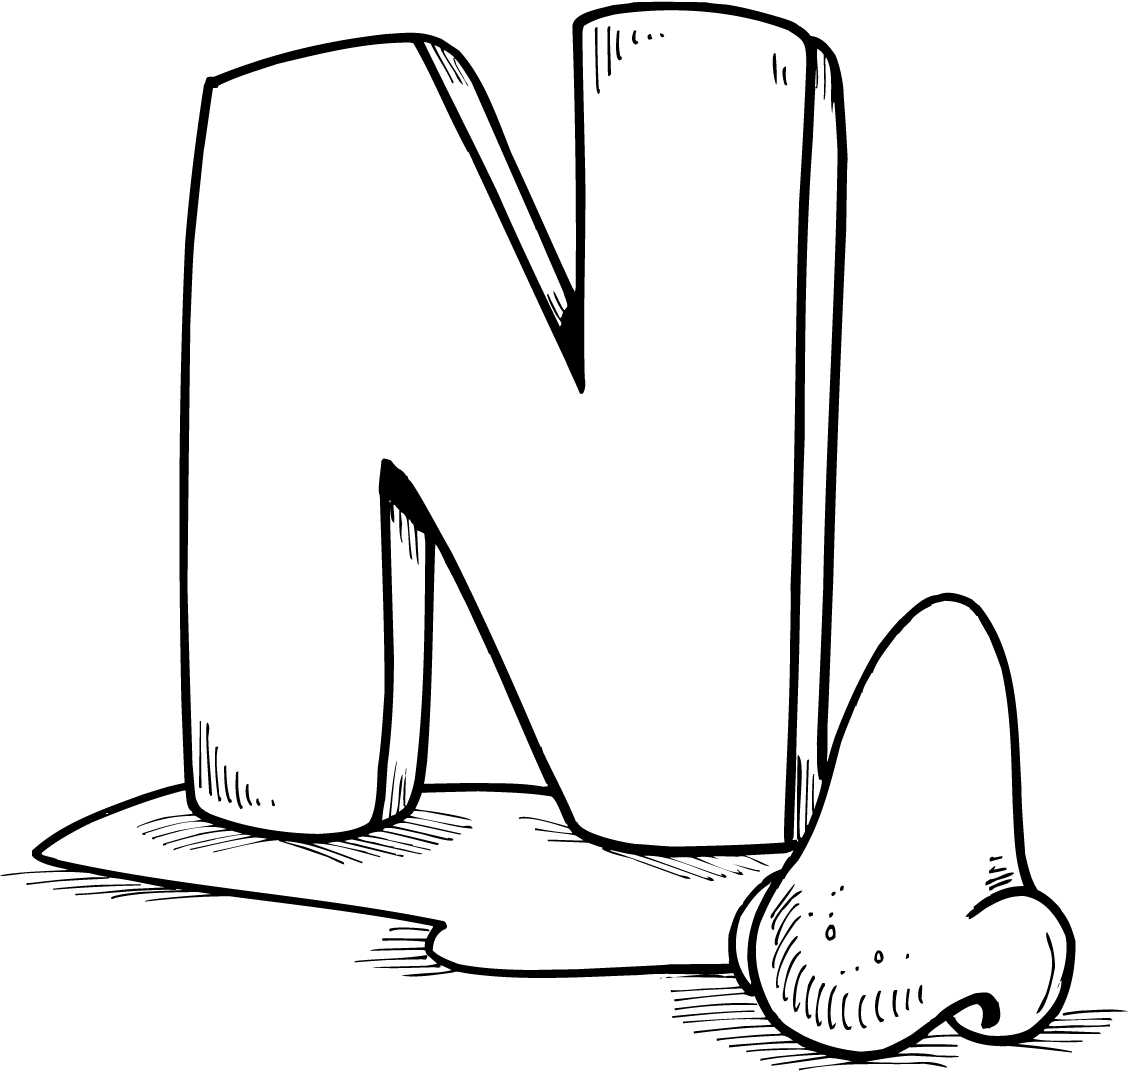 N Coloring Pages Preschool - Letter n coloring page - British Learning ...